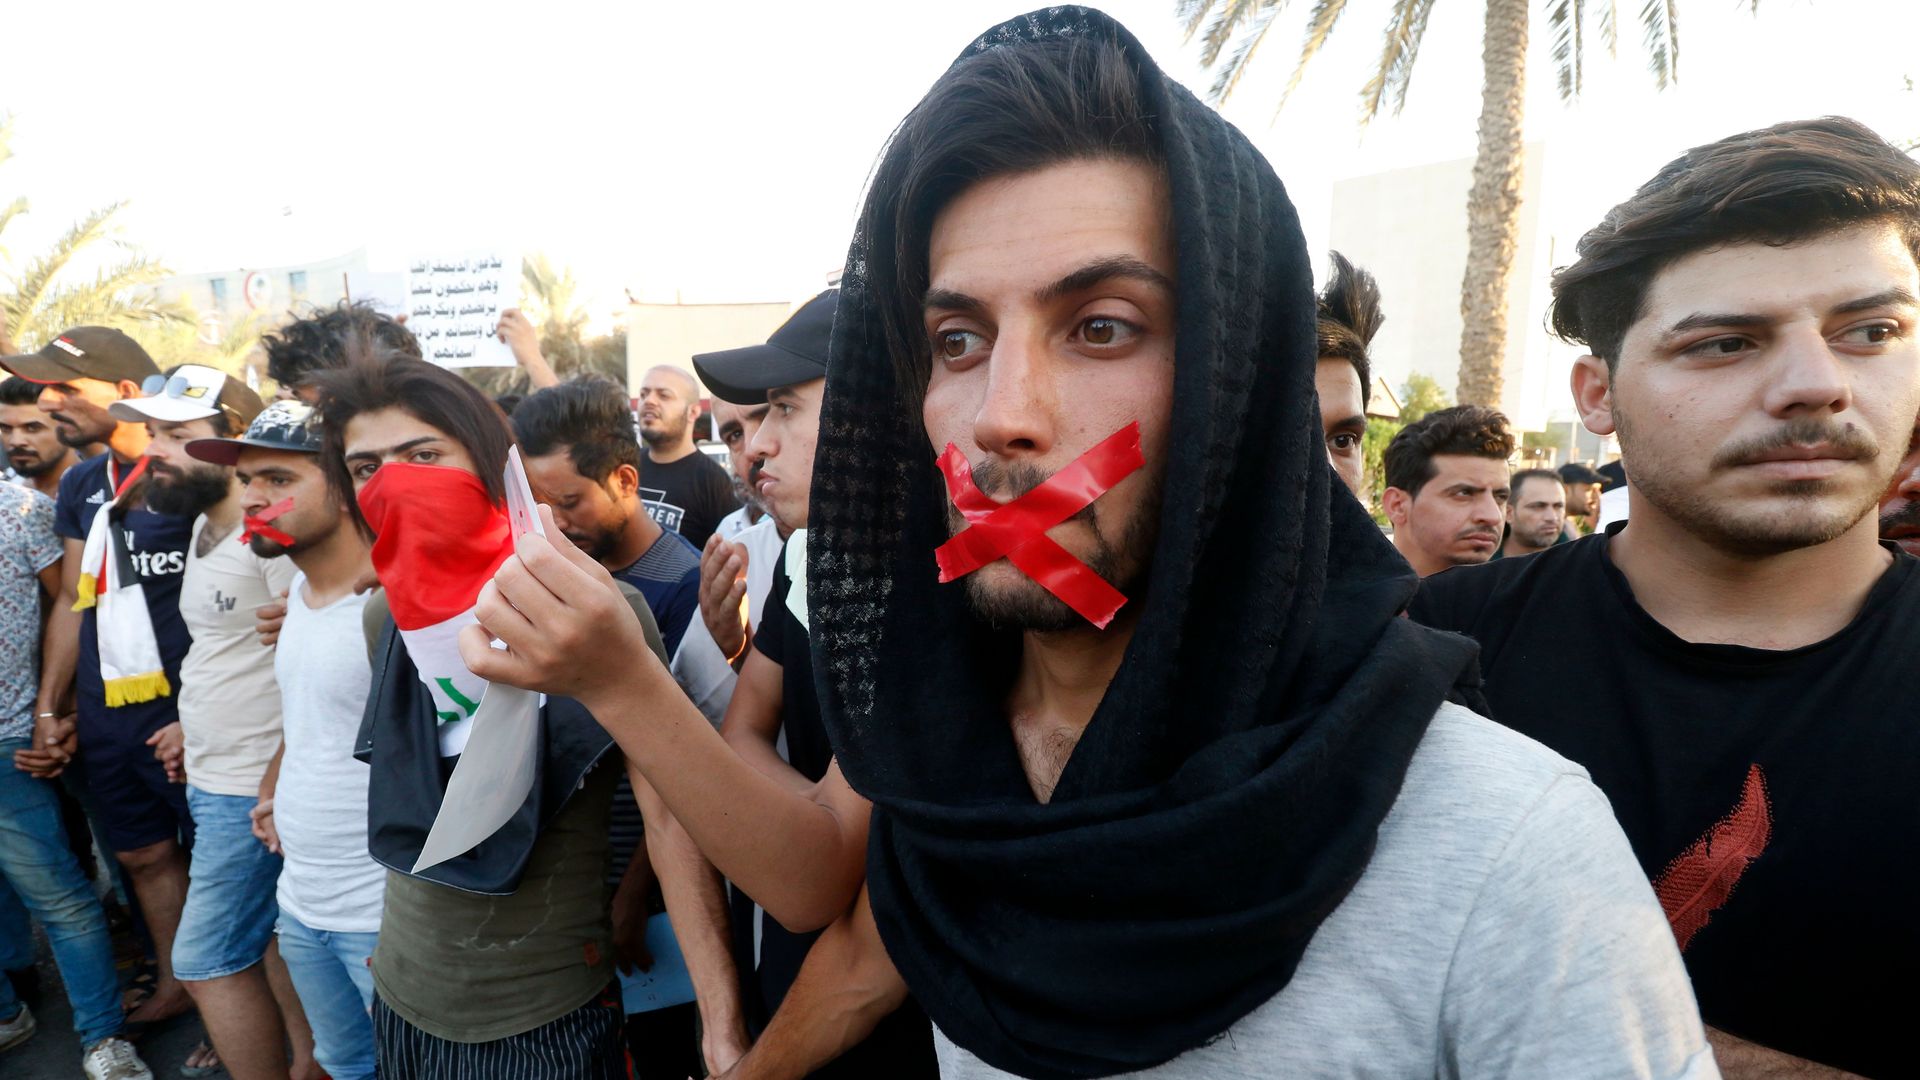 Iraqis with tape on their mouths attend a protest in the southern city of Basra on August 24, 2018.